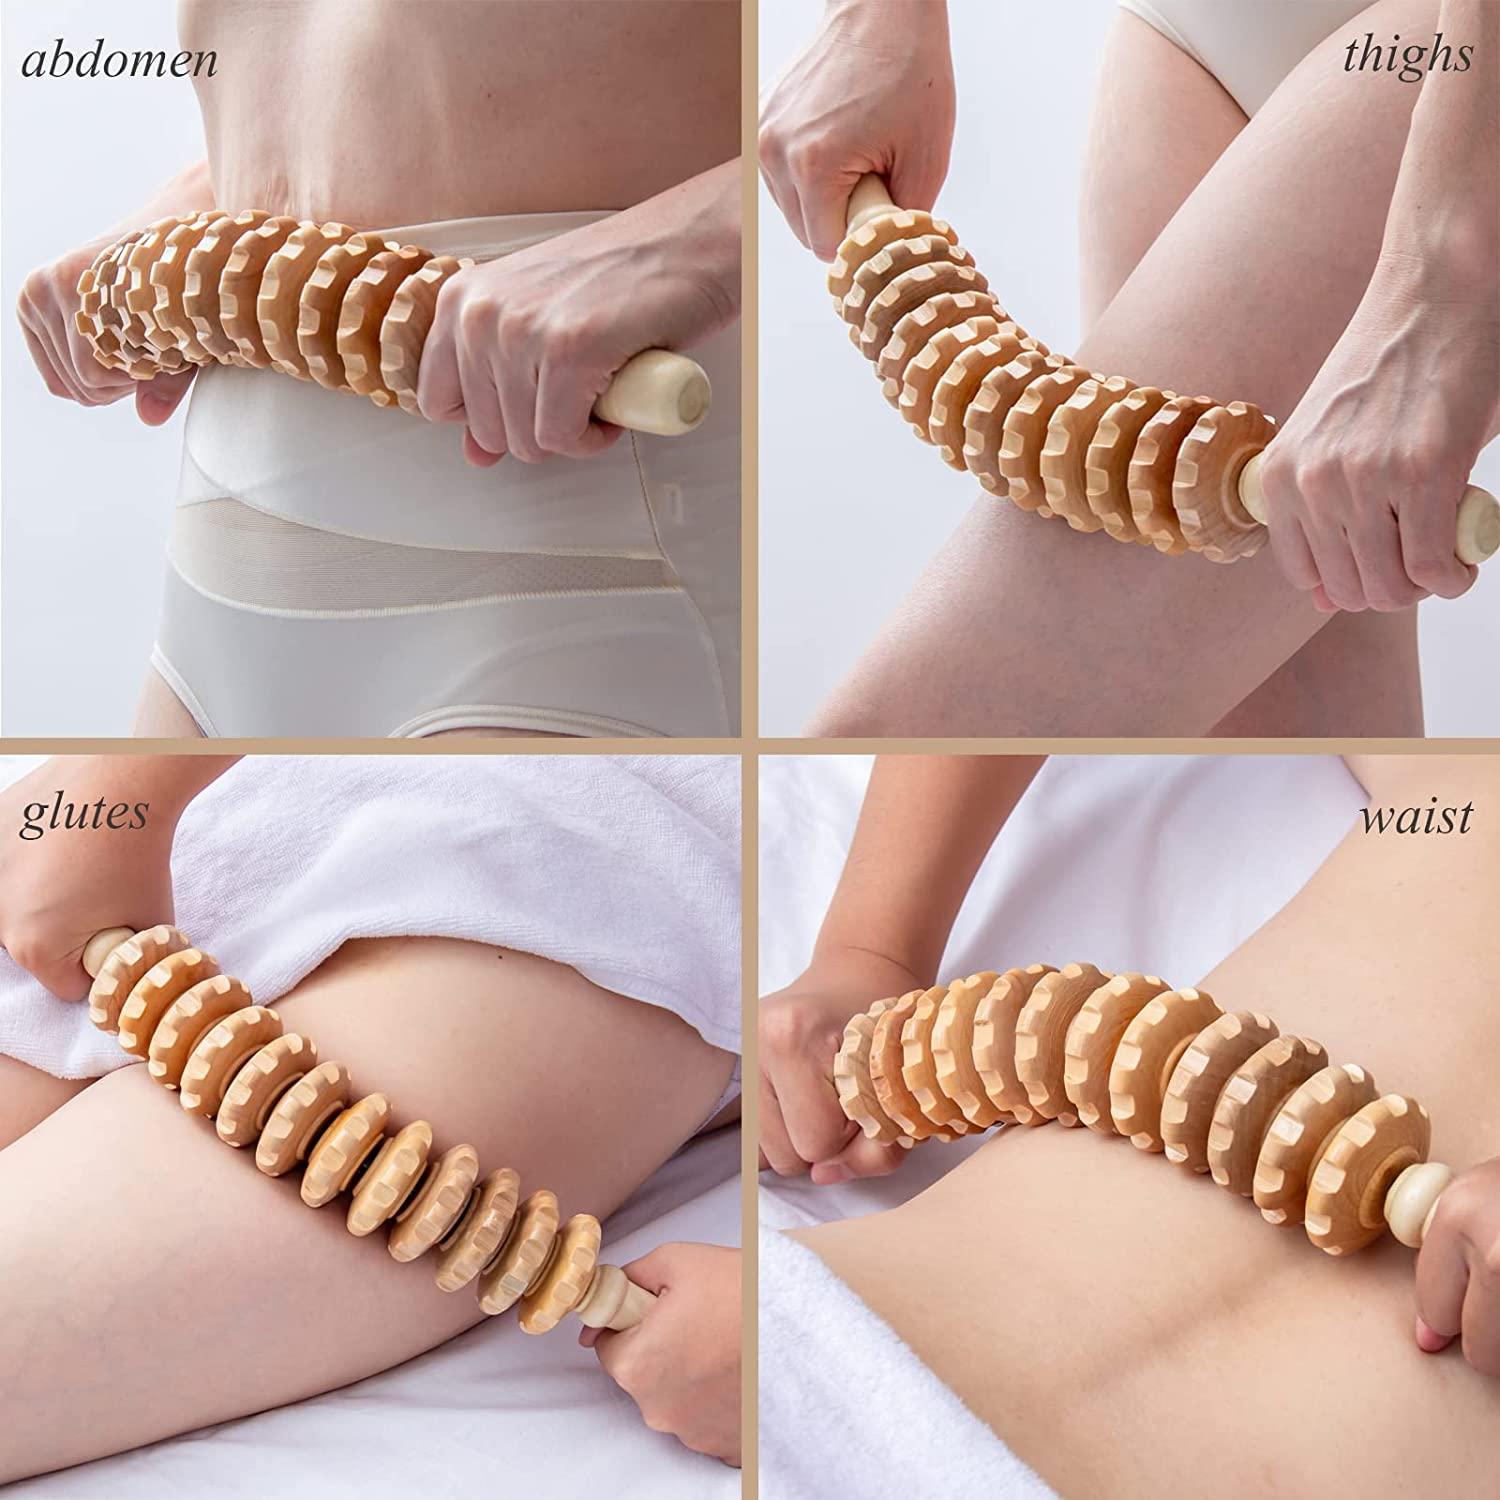 Body Back Wood Therapy Curved Roller for Maderoterapia, Lymphatic Drainage, Cellulite Massage, and Massage Rolling, Natural Muscle Massage Stick